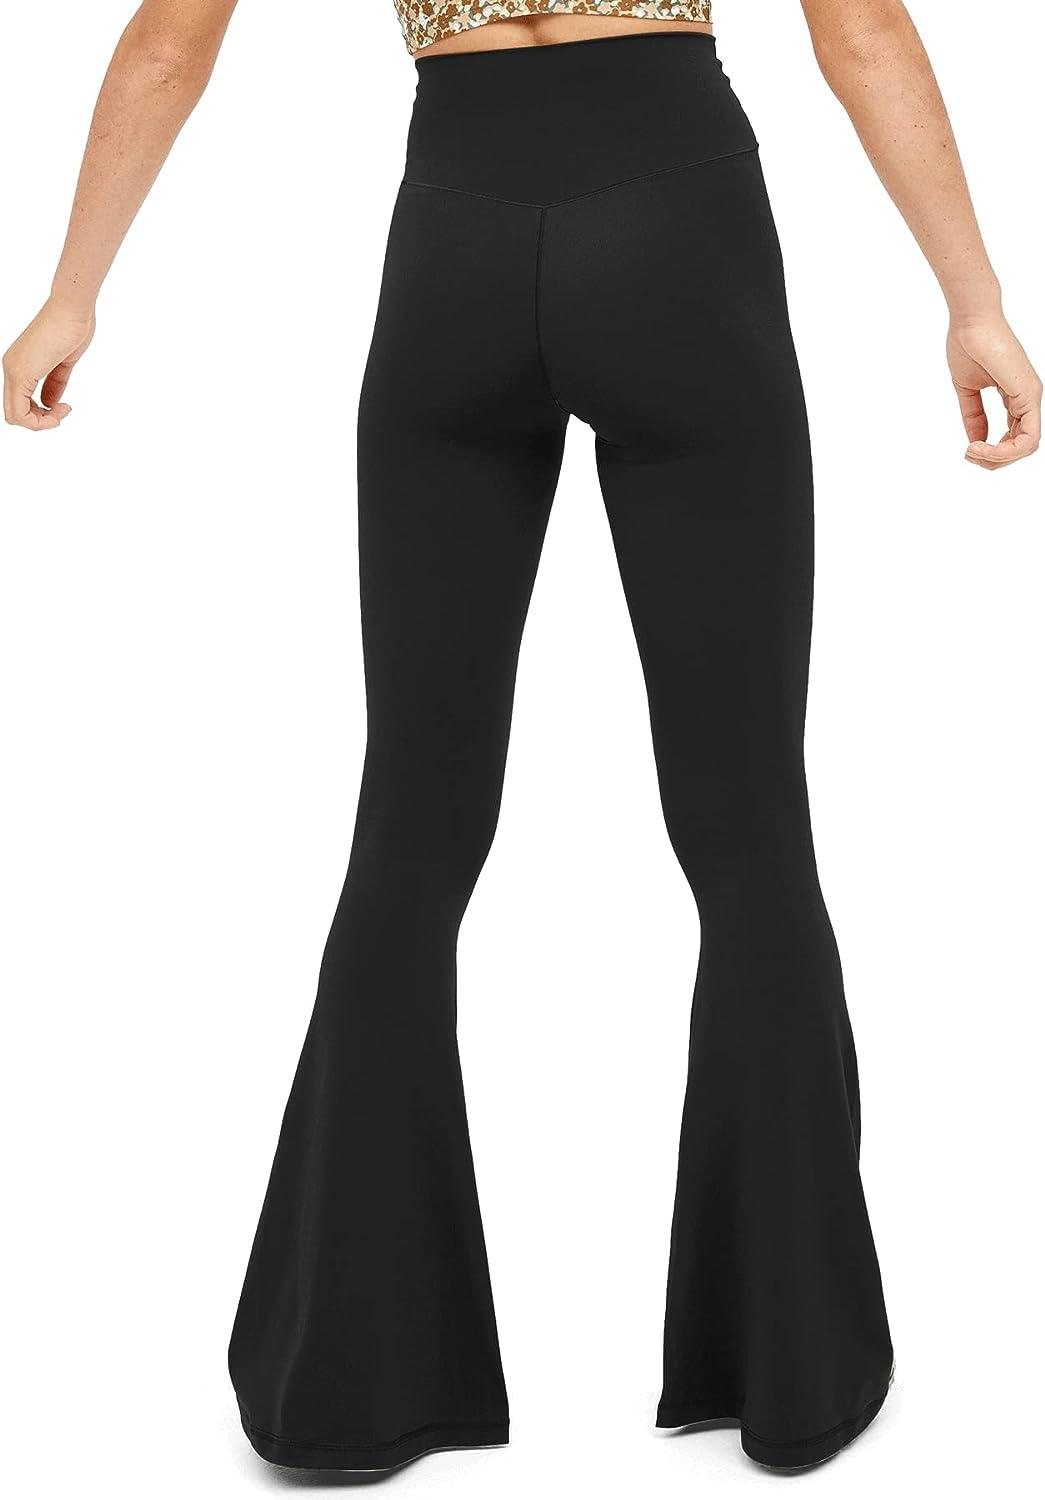 HEGALY Women's Flare Yoga Pants - Crossover Flare Georgia